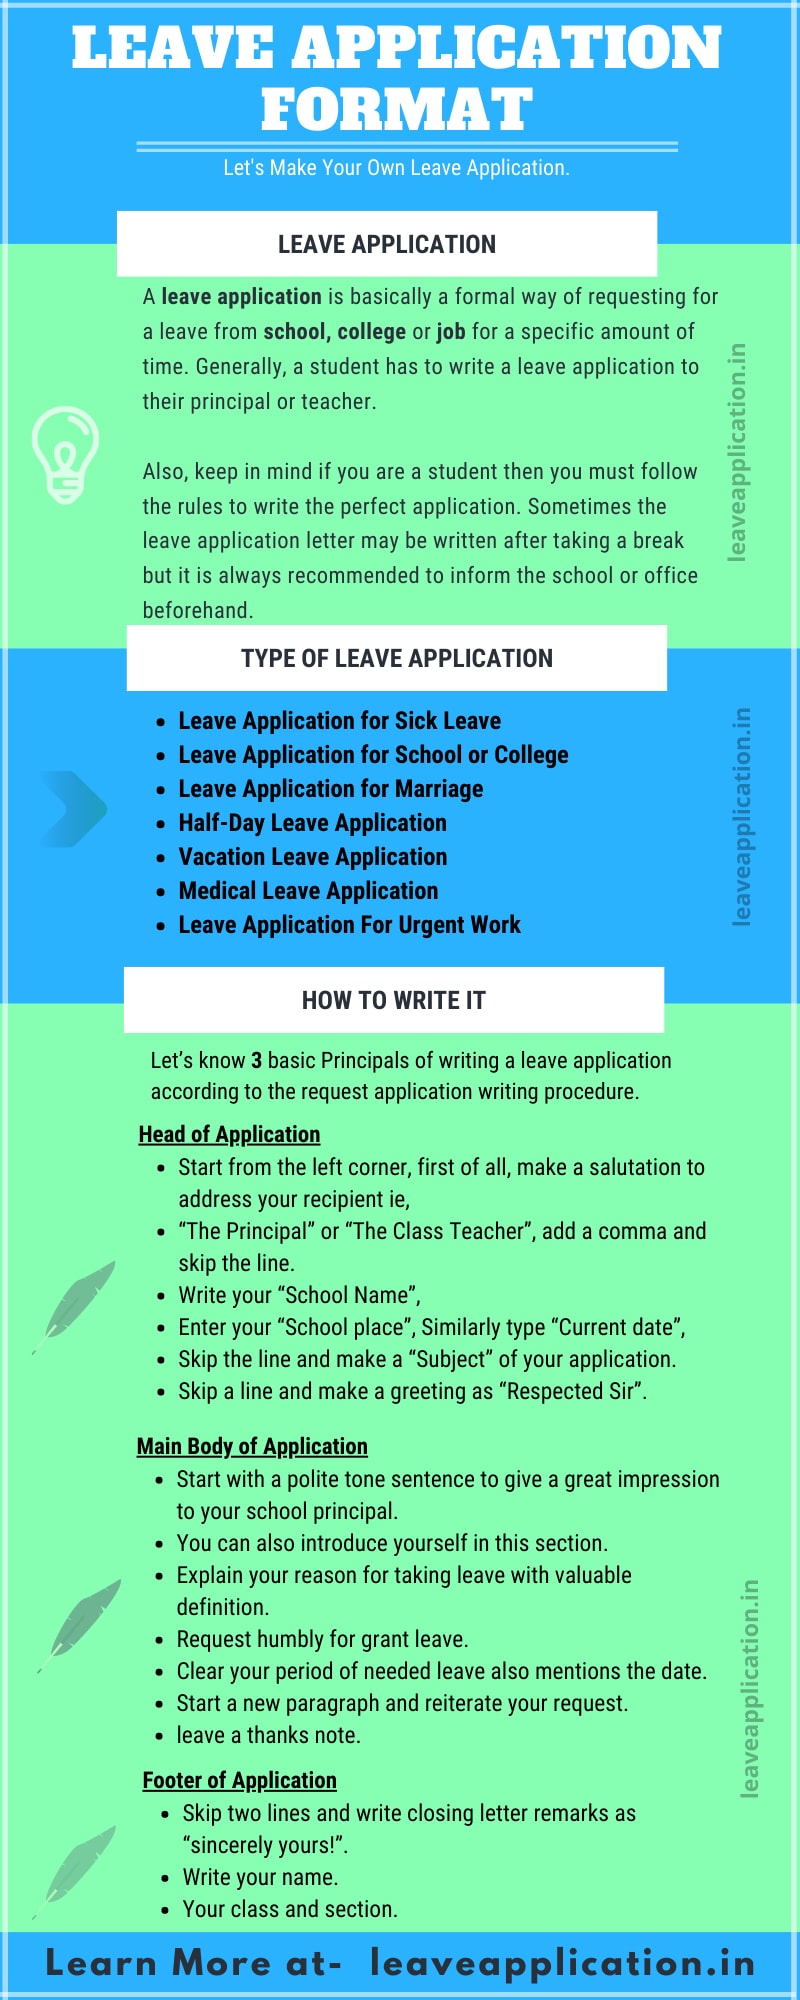 Application For Leave In School Format, Application For Leave In School In English, School Application For Leave, Application For Leave In School For Marriage